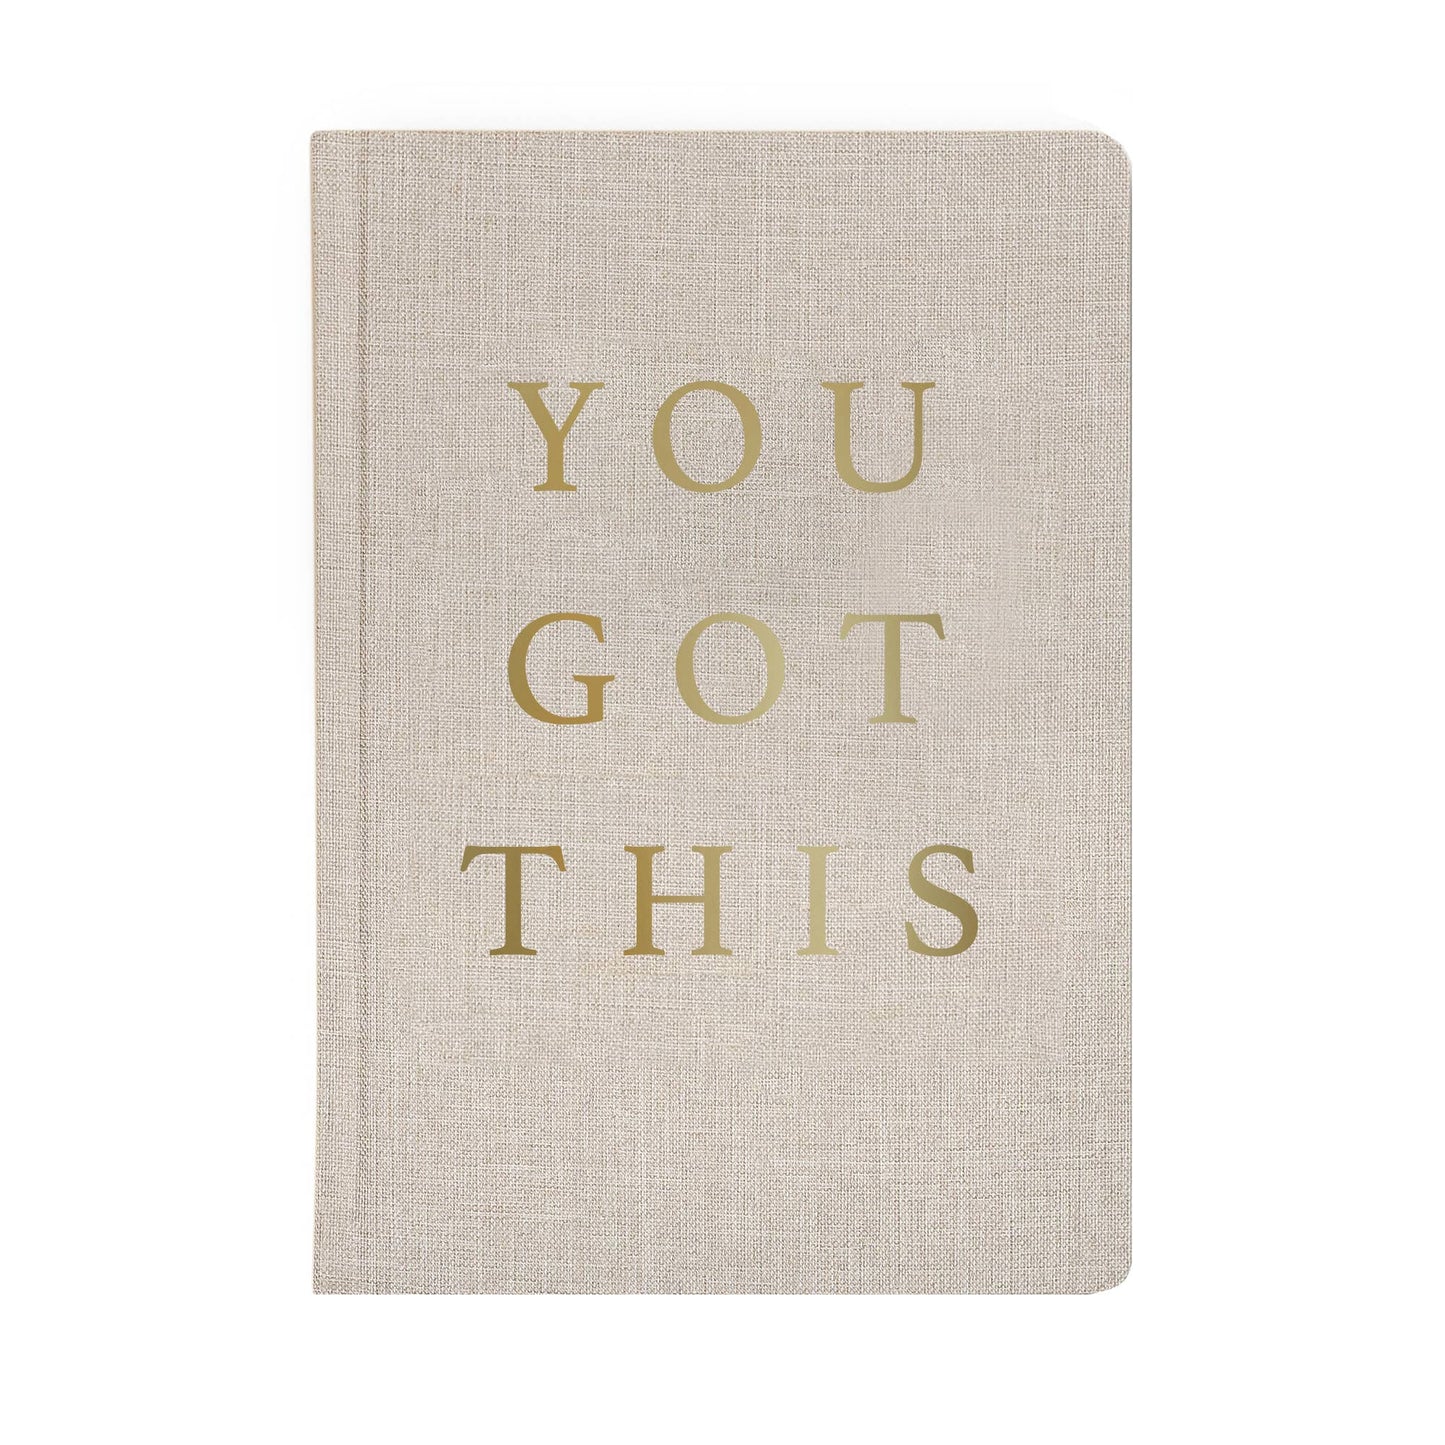 You Got This Tan and Gold Foil Fabric Journal